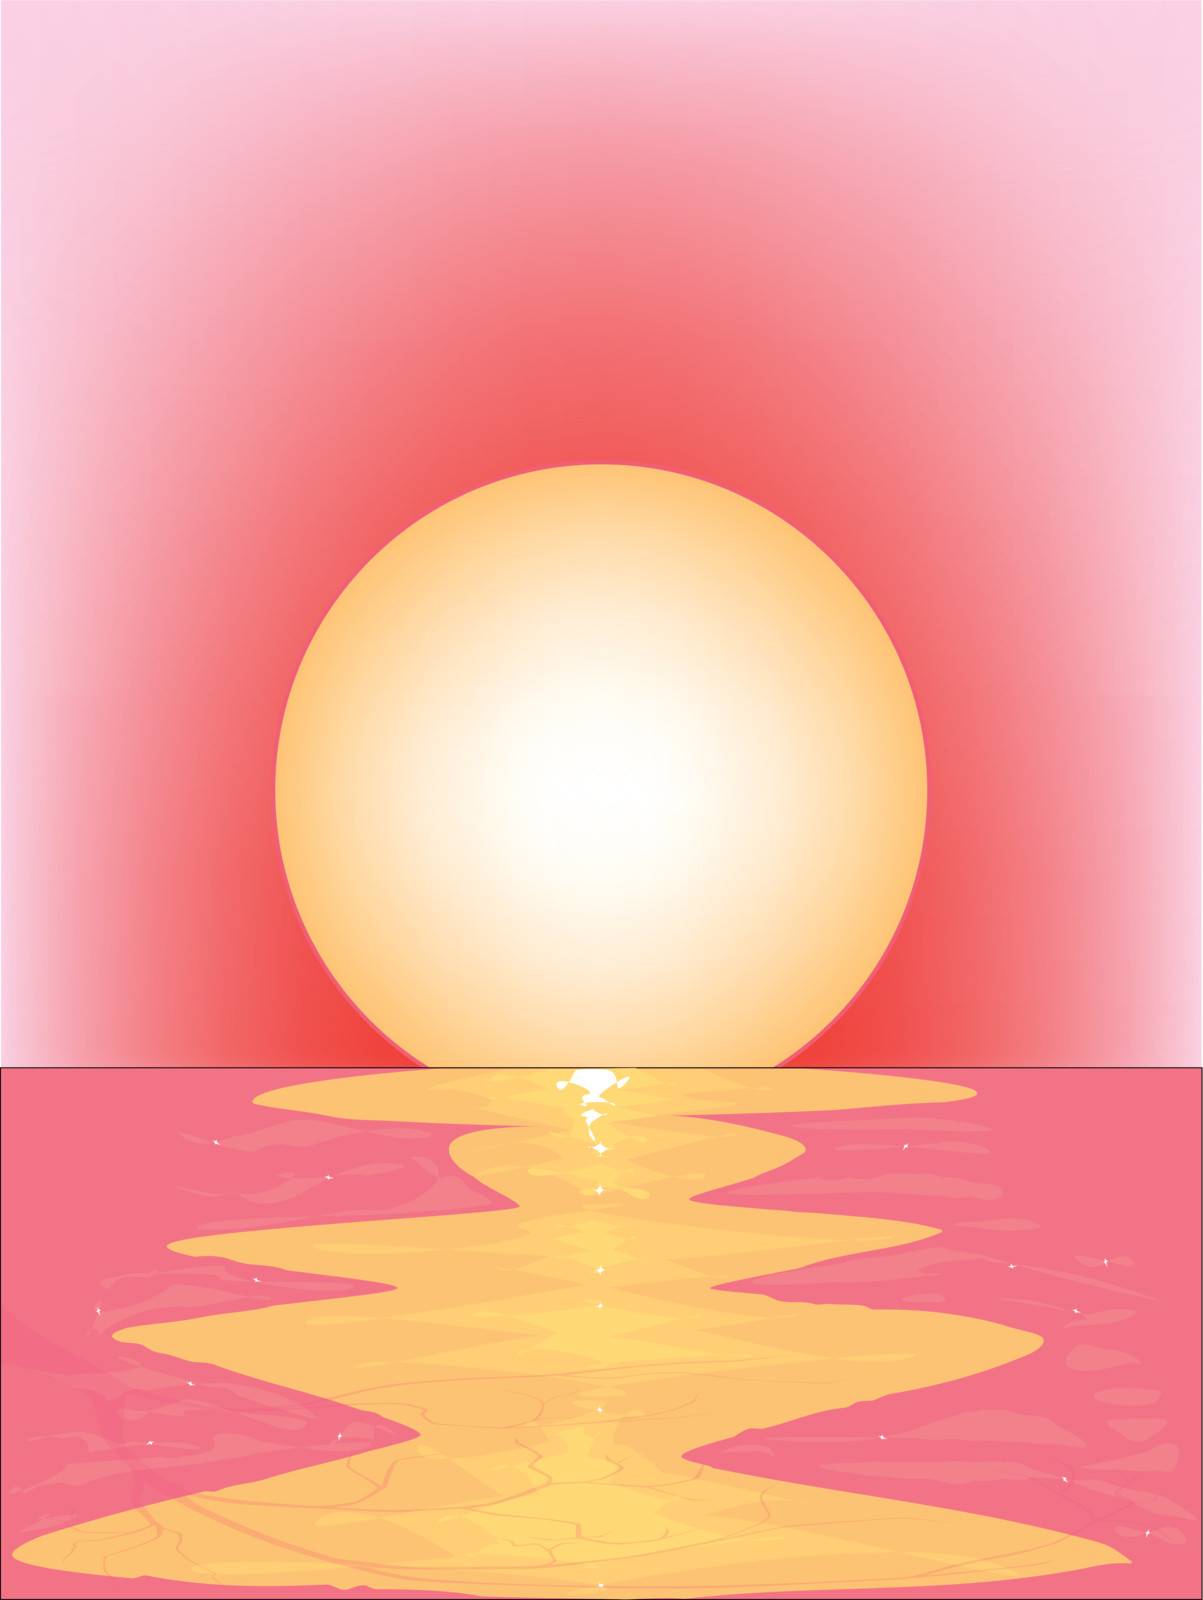 A pink sunset over water with ripples and a large sun.